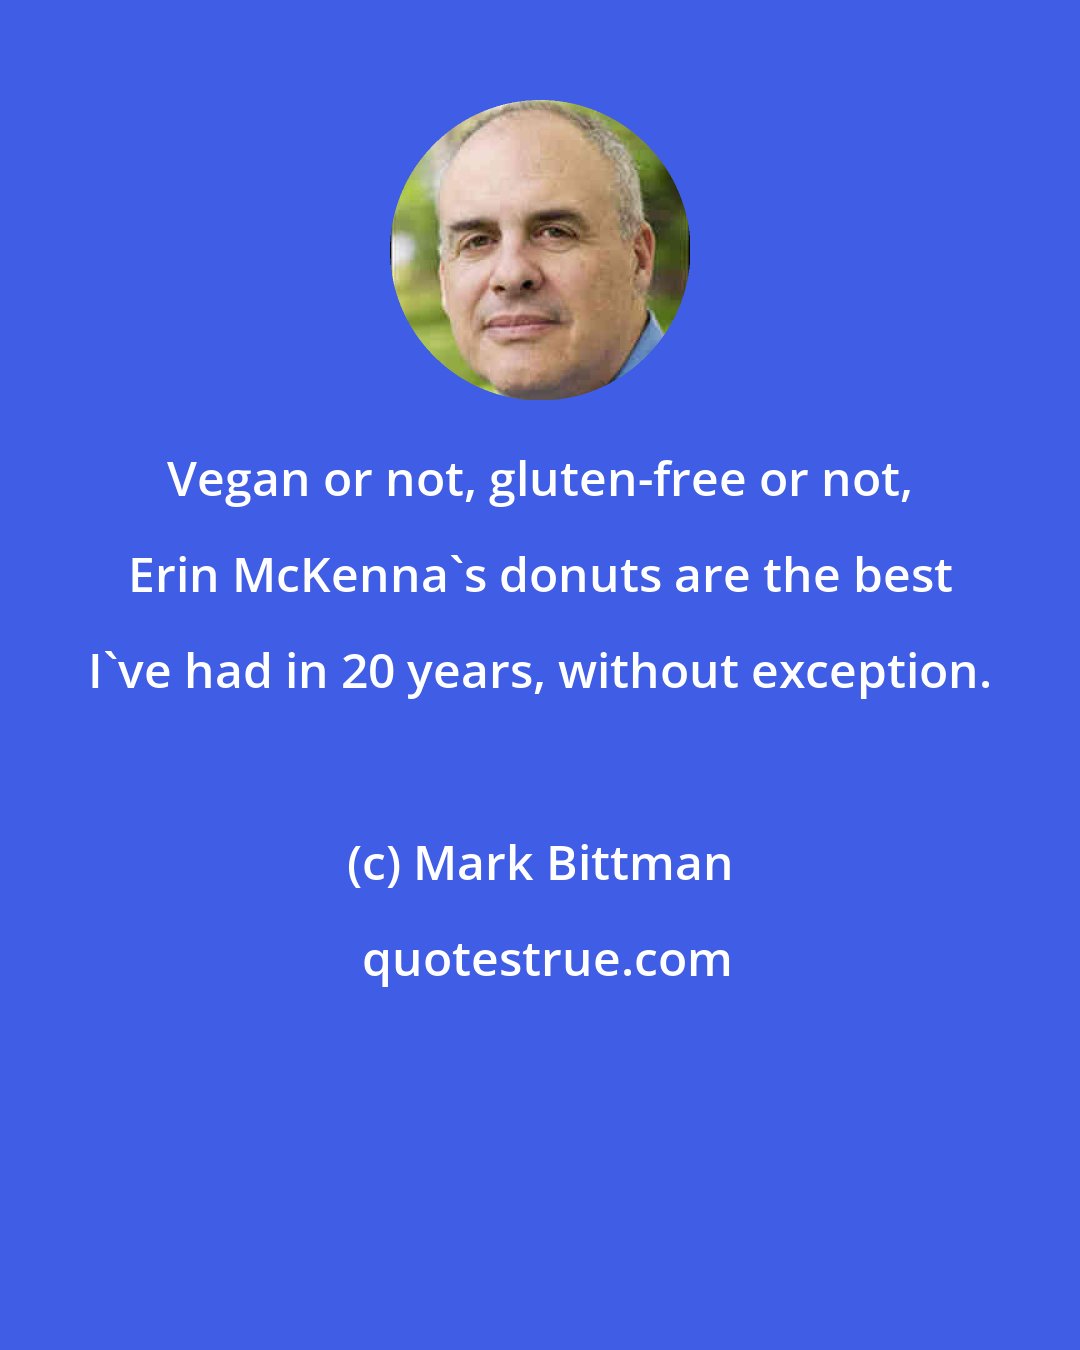 Mark Bittman: Vegan or not, gluten-free or not, Erin McKenna's donuts are the best I've had in 20 years, without exception.